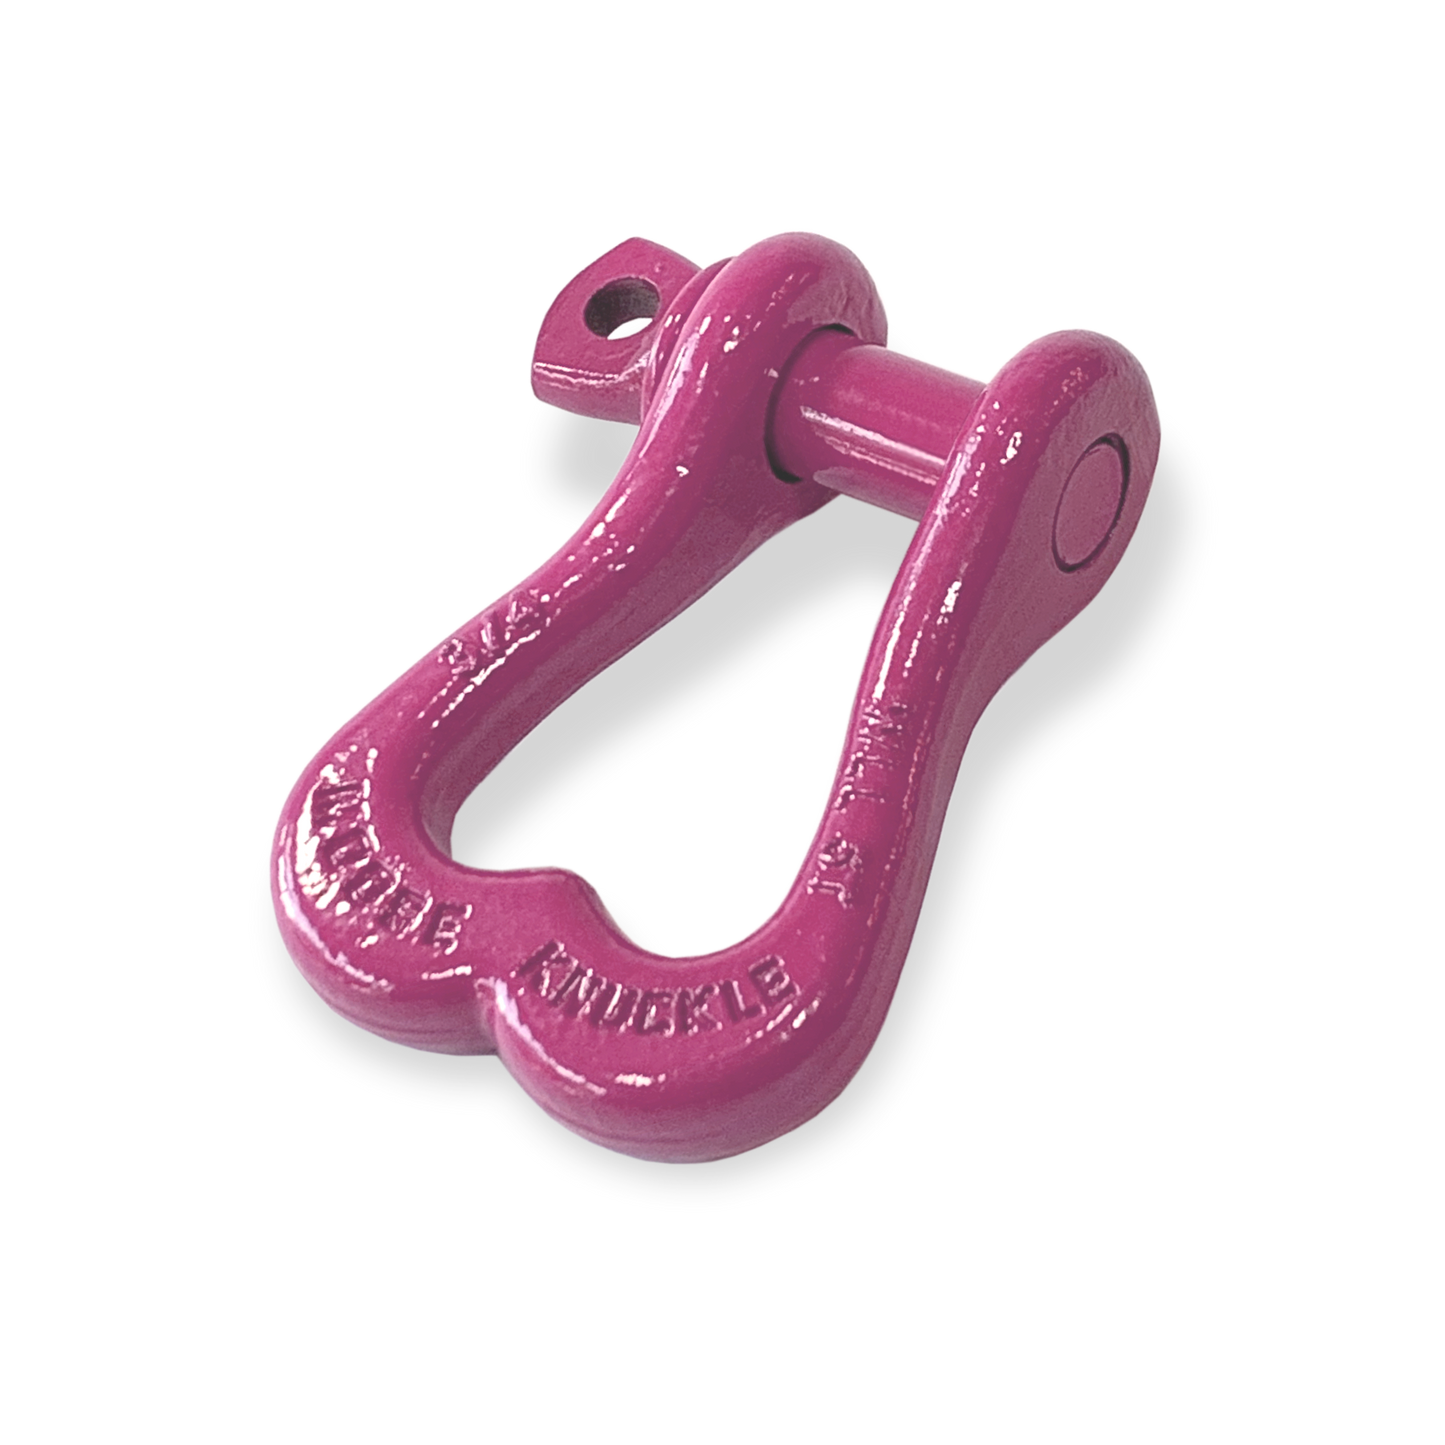 Moose Knuckle XL Pretty Pink Powder Coated Colored Shackle for Tow Straps, Off Roading and Truck Nuts Vehicle Recovery